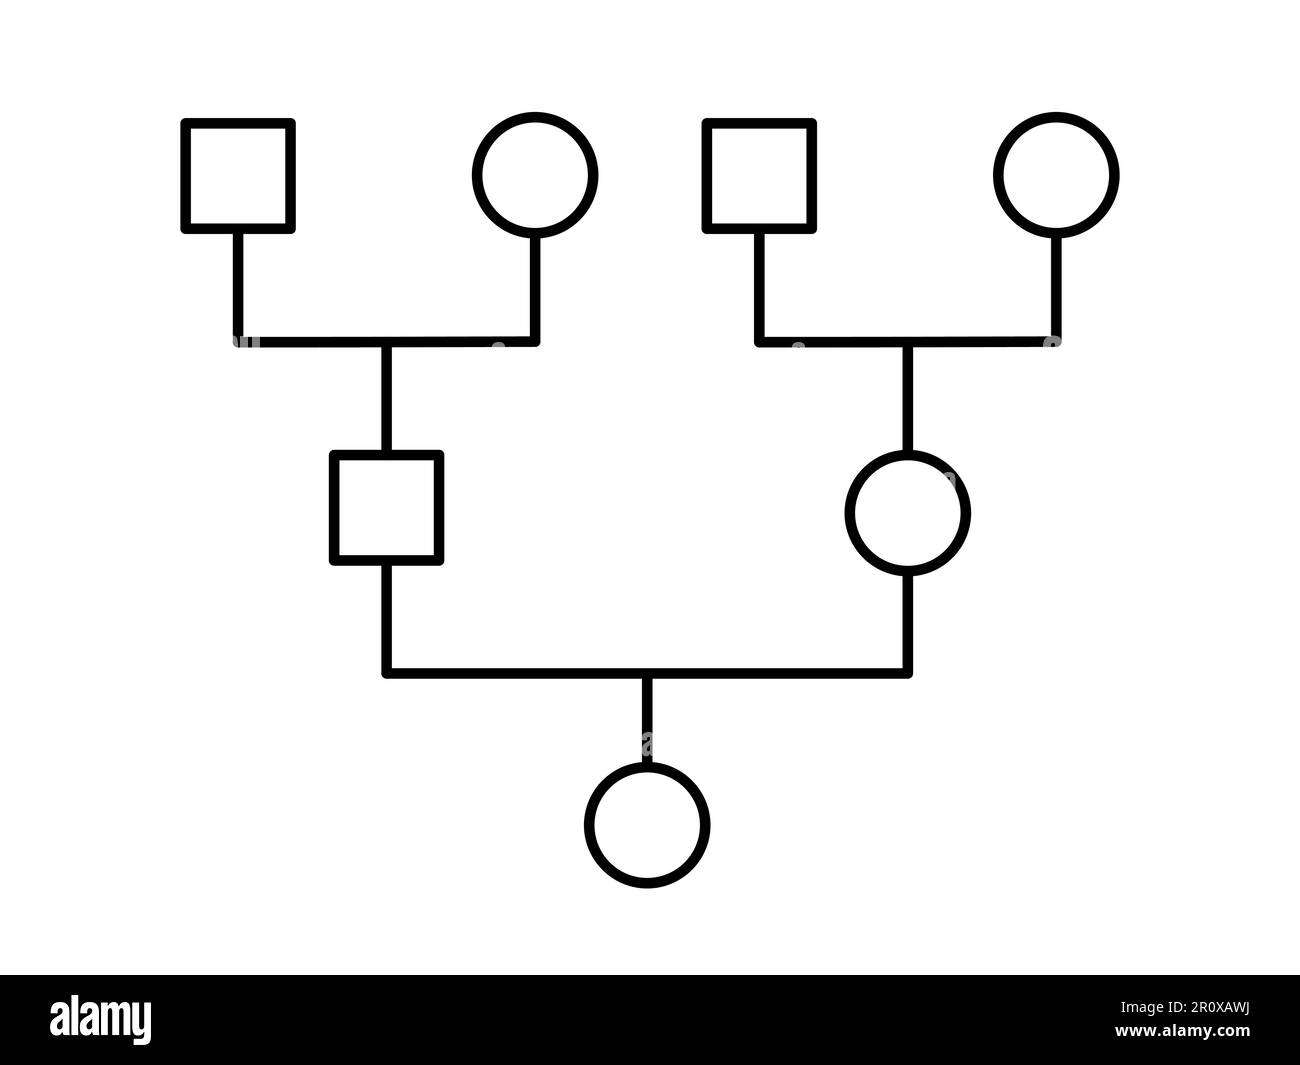 How to fill out pedigree chart  Pedigree chart, Family tree chart